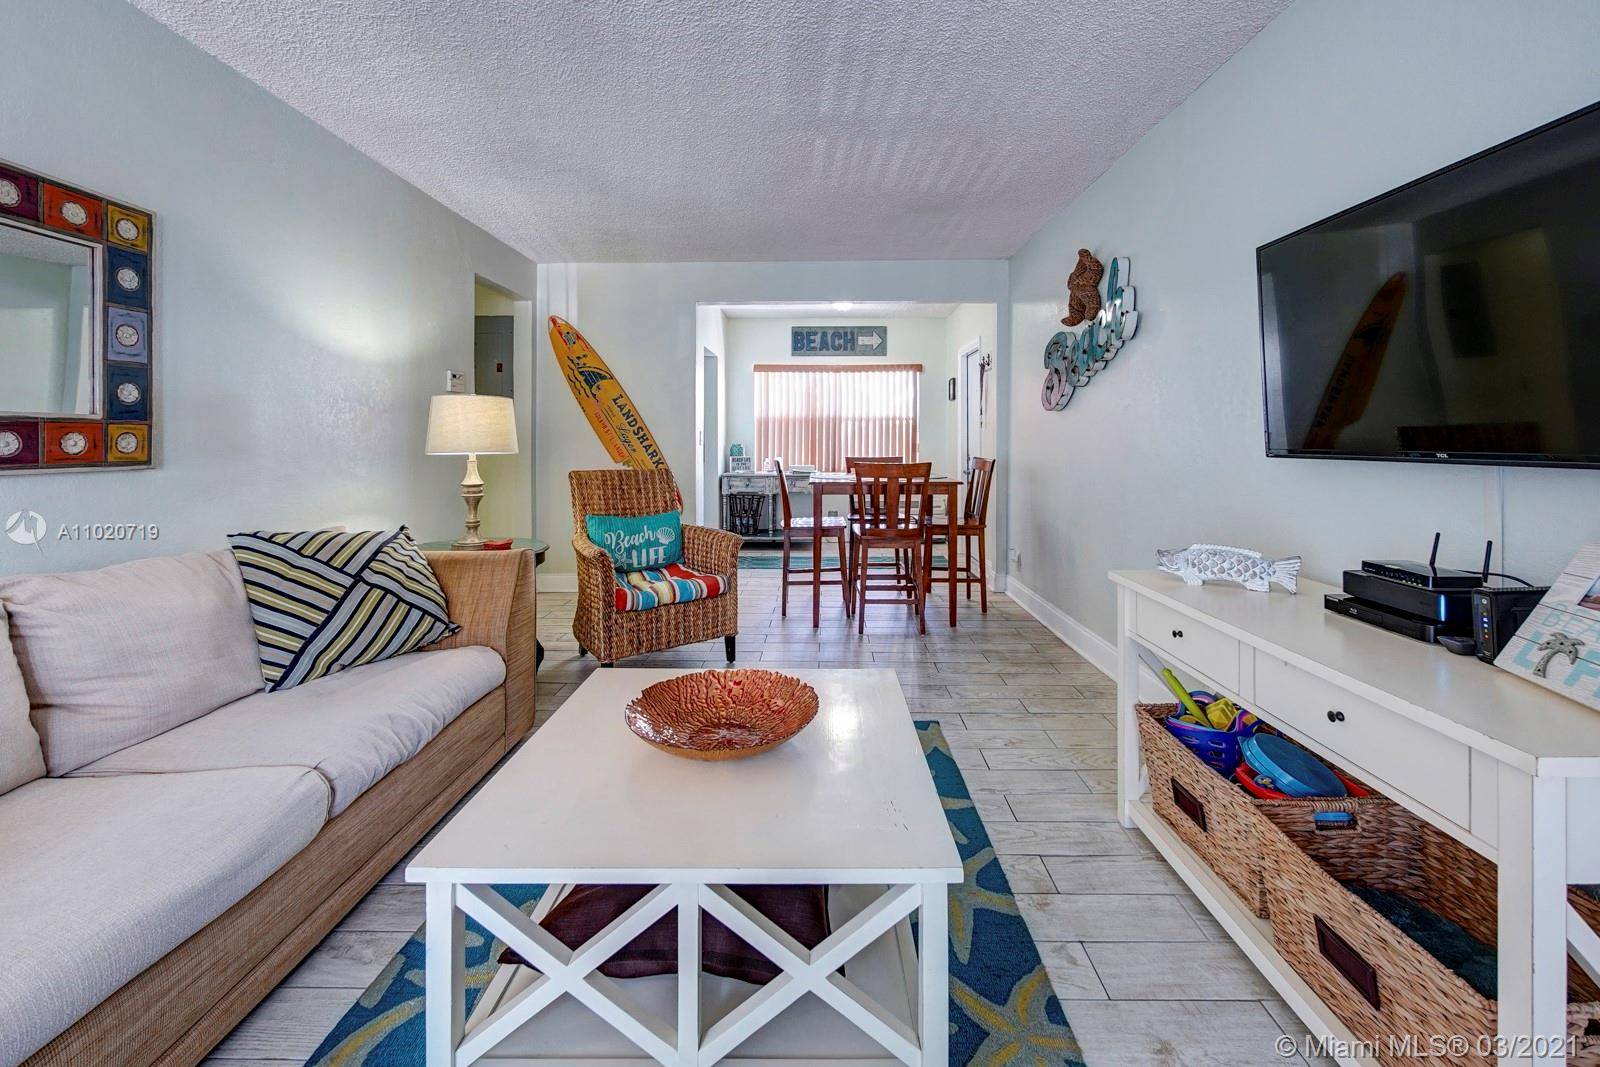 BEAUTIFUL HOLLYWOOD BEACH CONDO, 1 BED 1 BATH FULLY FURNISHED AND FINISHED, TURN KEY UNIT.